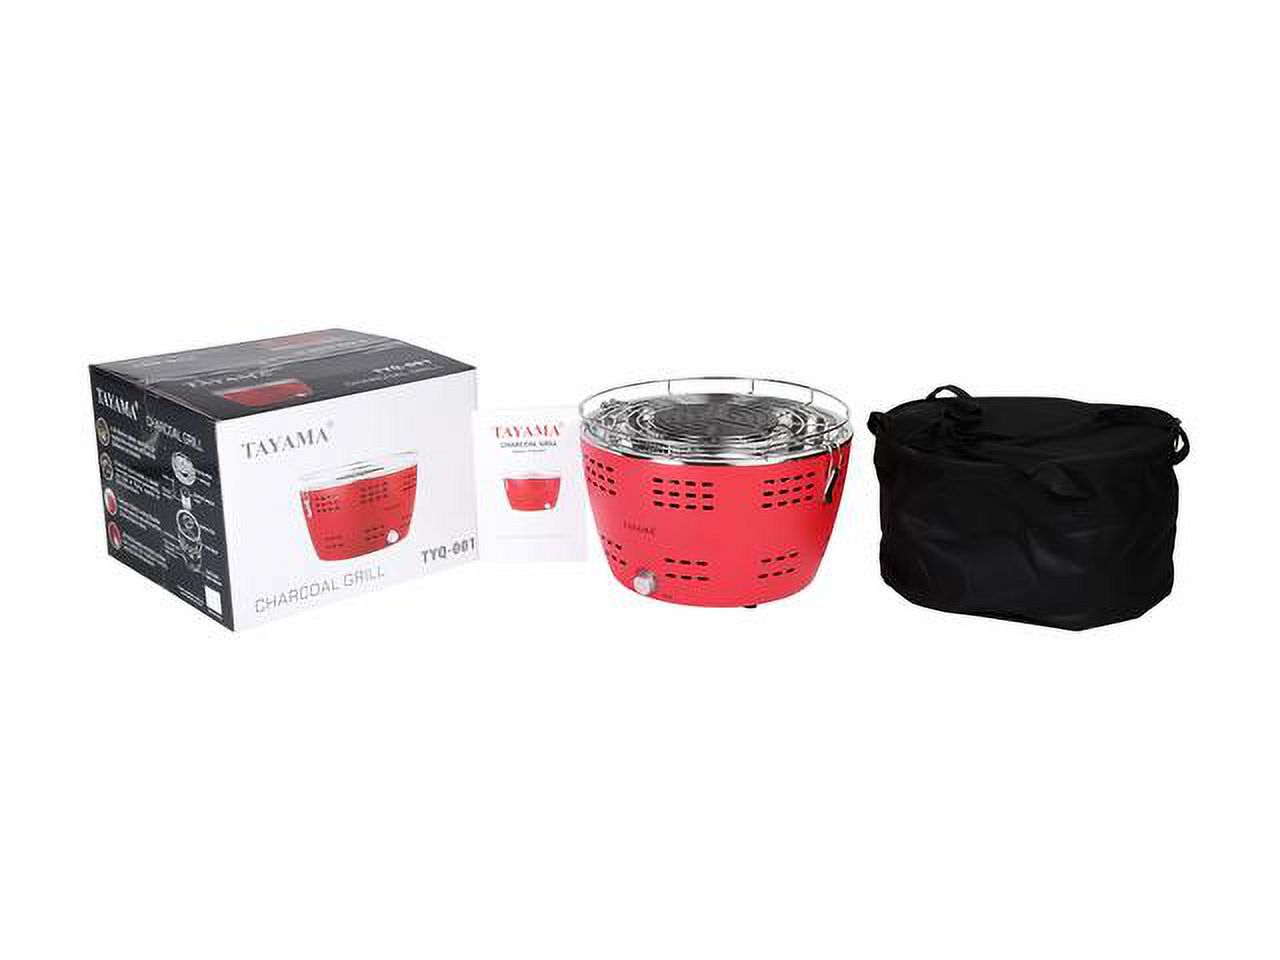 Tayama Portable Charcoal Grill in Red - image 4 of 8